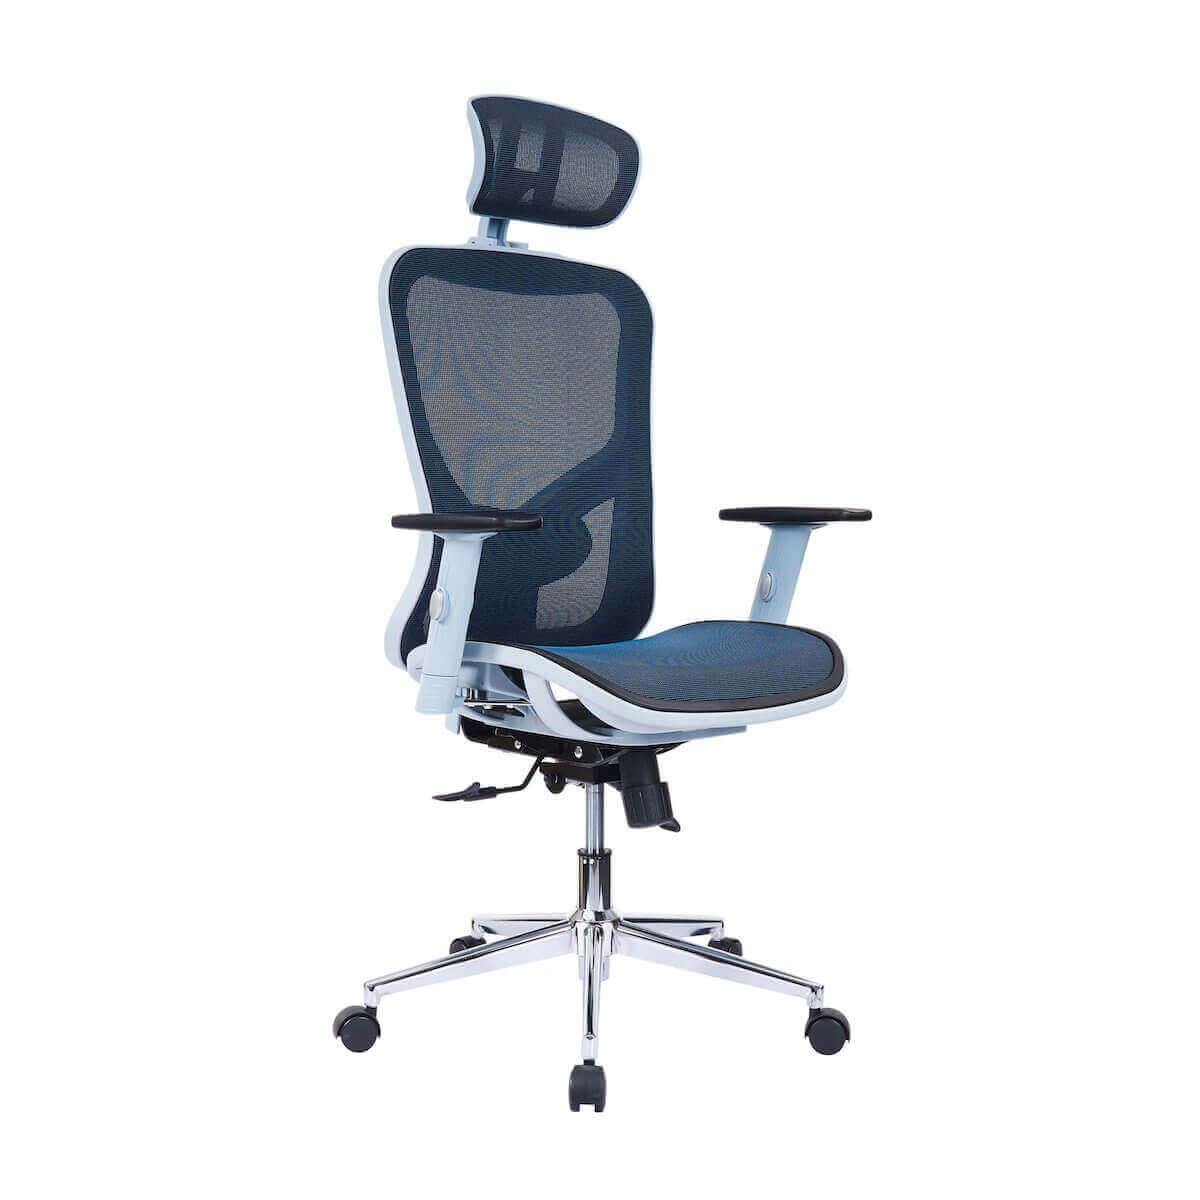 Techni Mobili Blue High Back Executive Mesh Office Chair with Arms, Headrest, and Lumbar Support RTA-1008-BL Angle